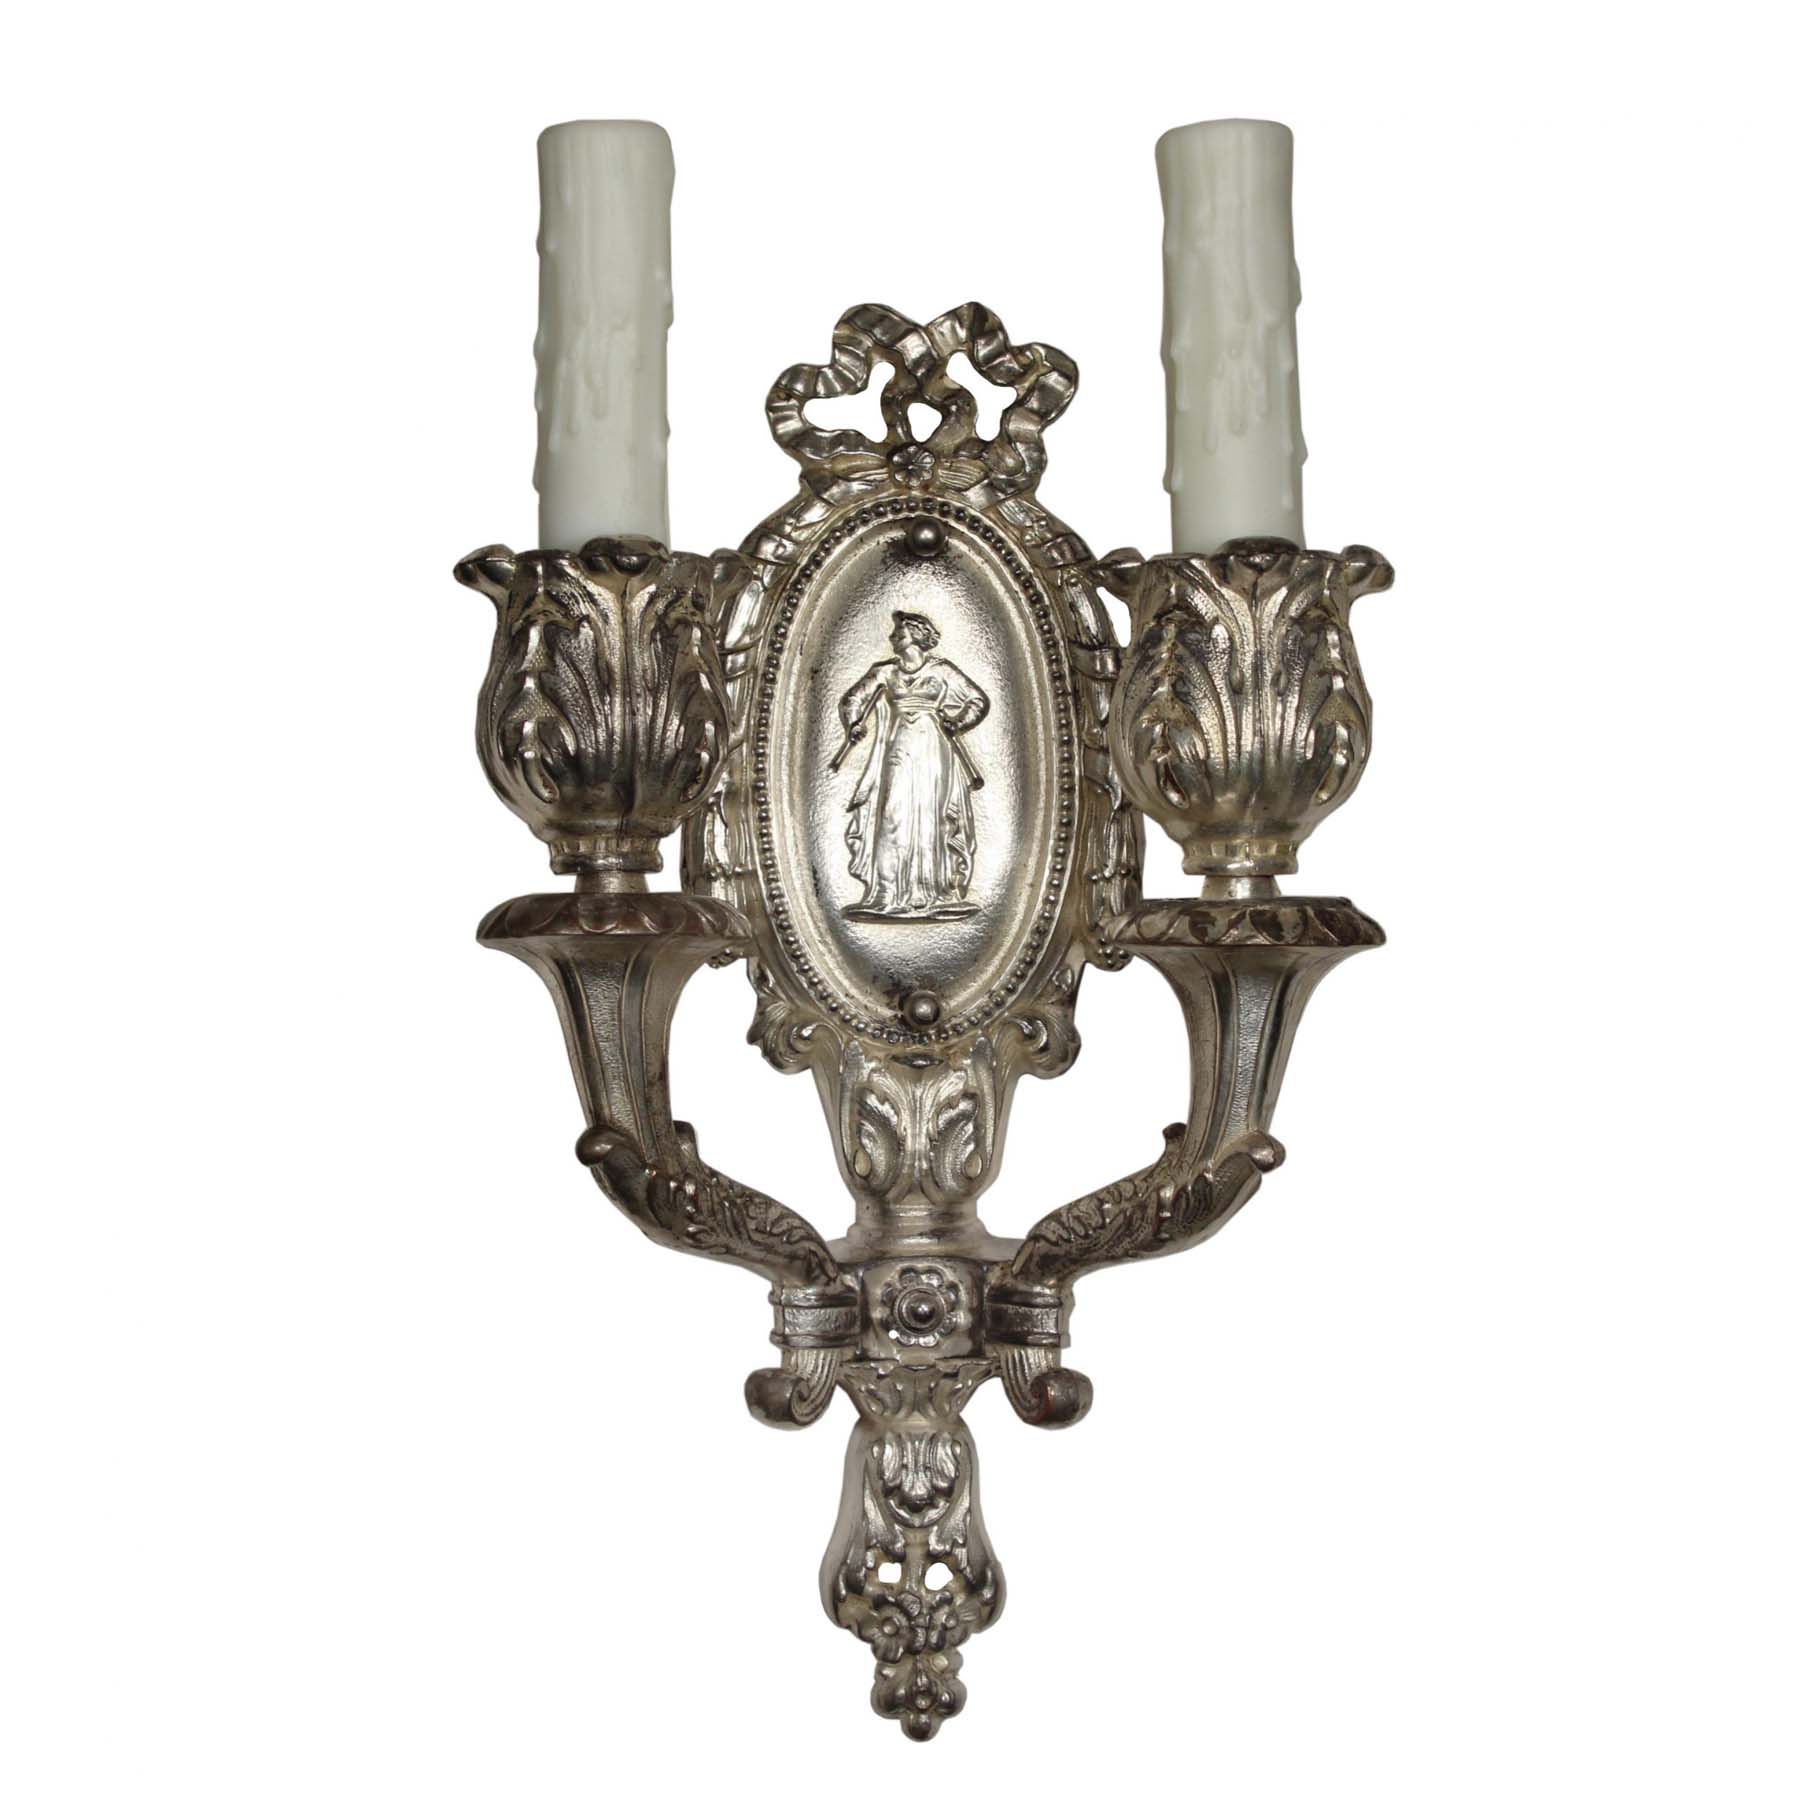 Pairs of Antique Neoclassical Figural Sconces by Baldinger-66587